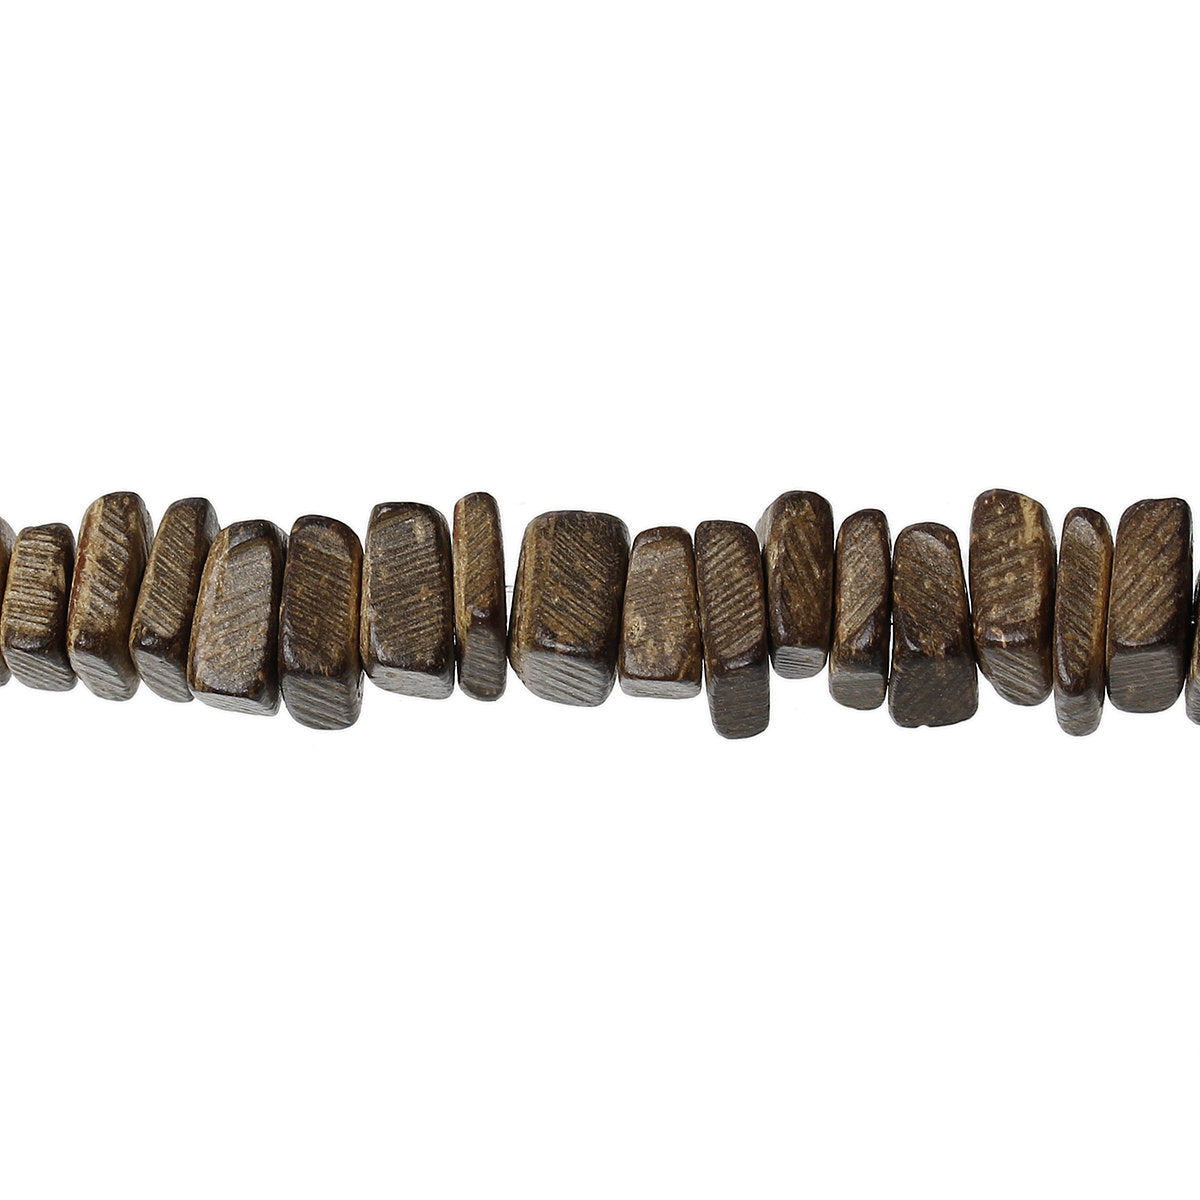 Brown Wood CocoNut Shell Beads - Square cut beads 9mm 